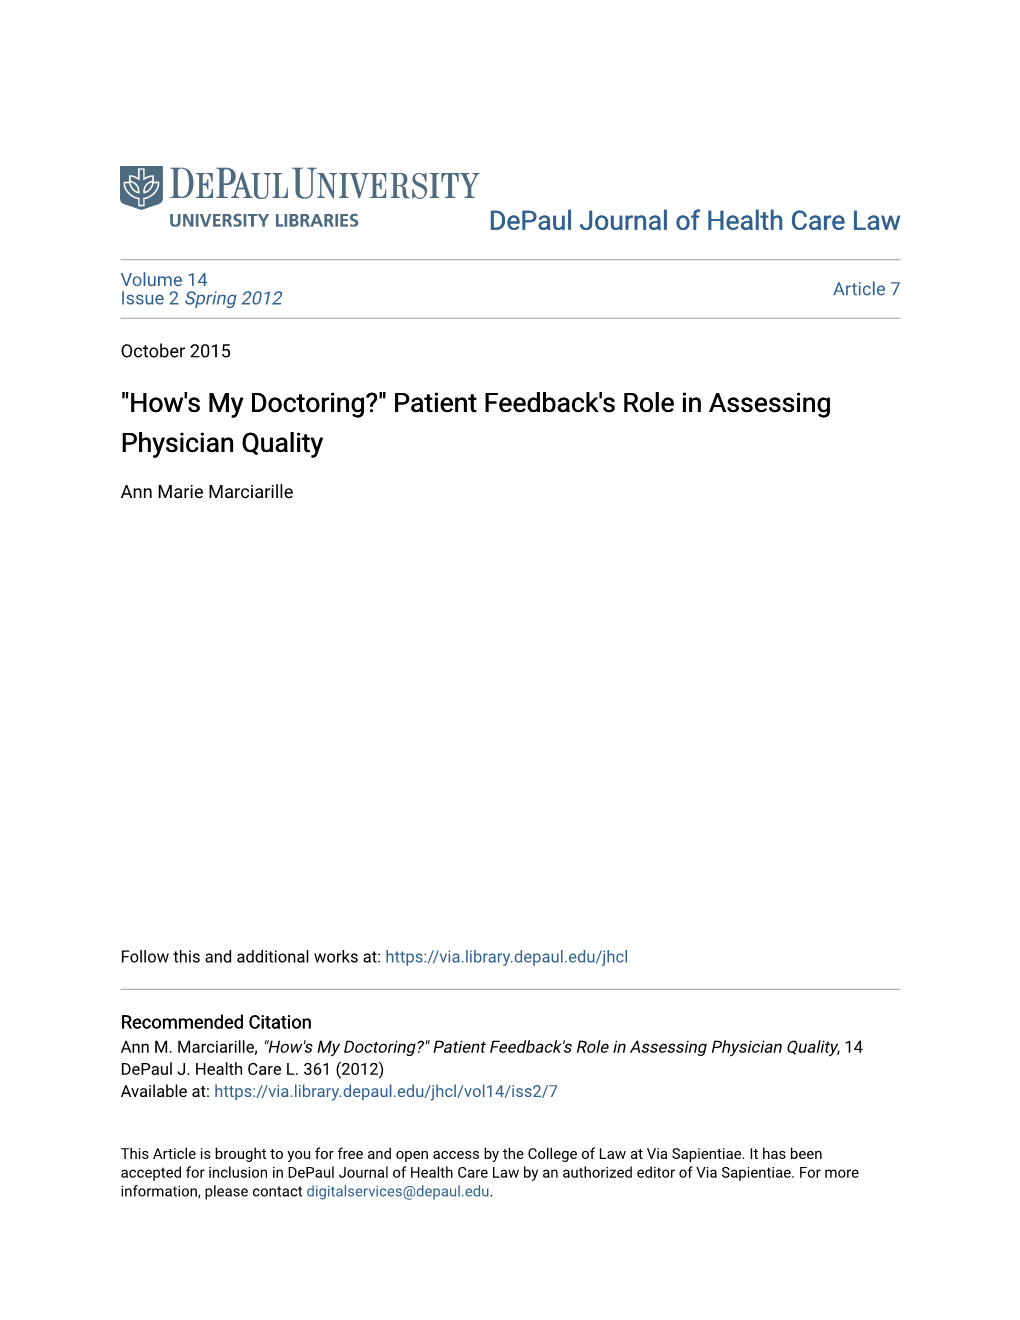 Patient Feedback's Role in Assessing Physician Quality